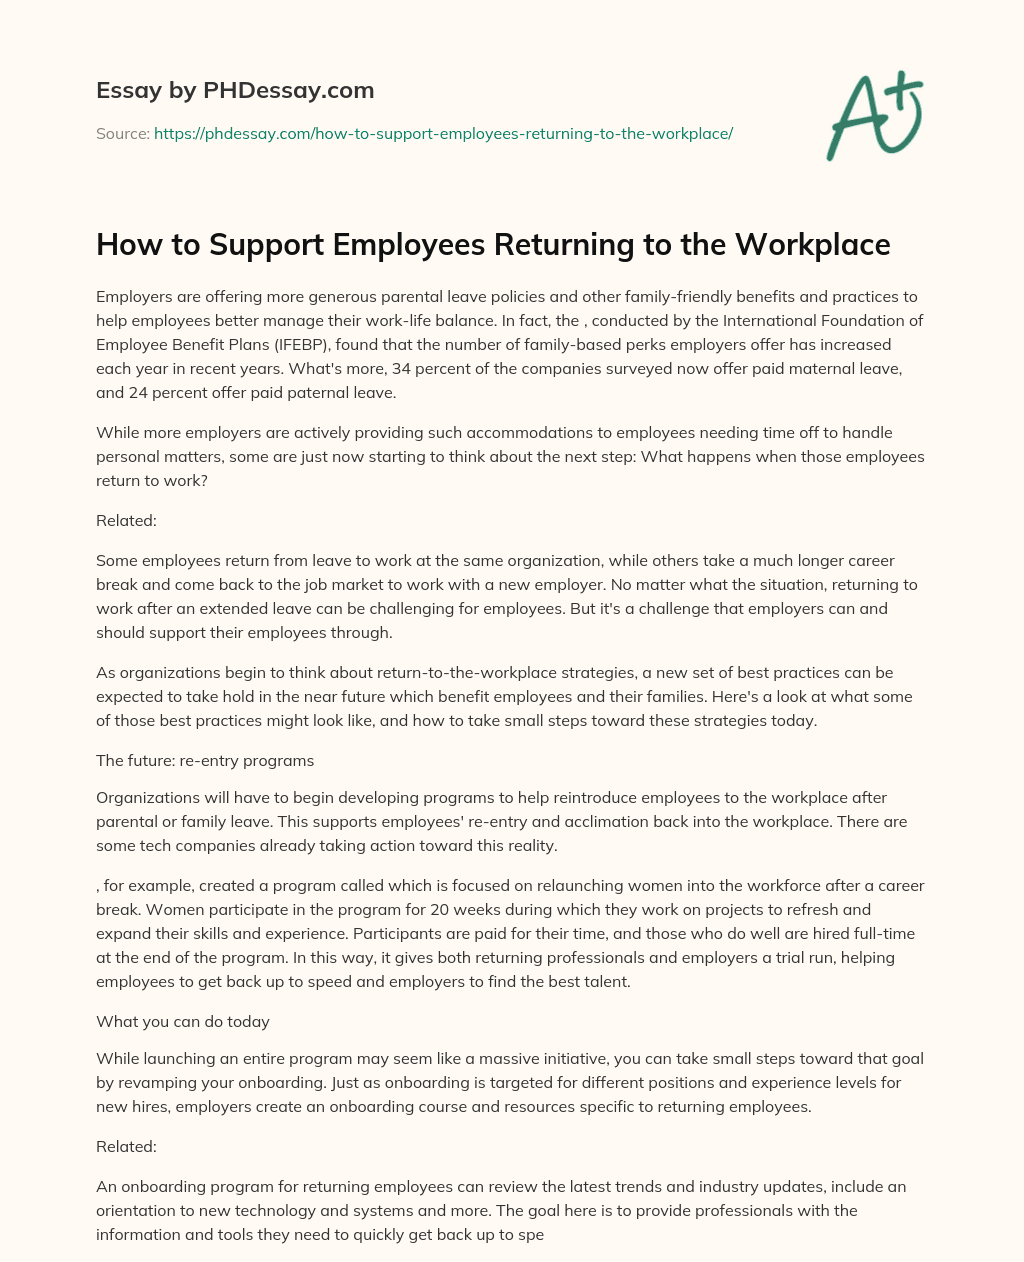 How to Support Employees Returning to the Workplace essay